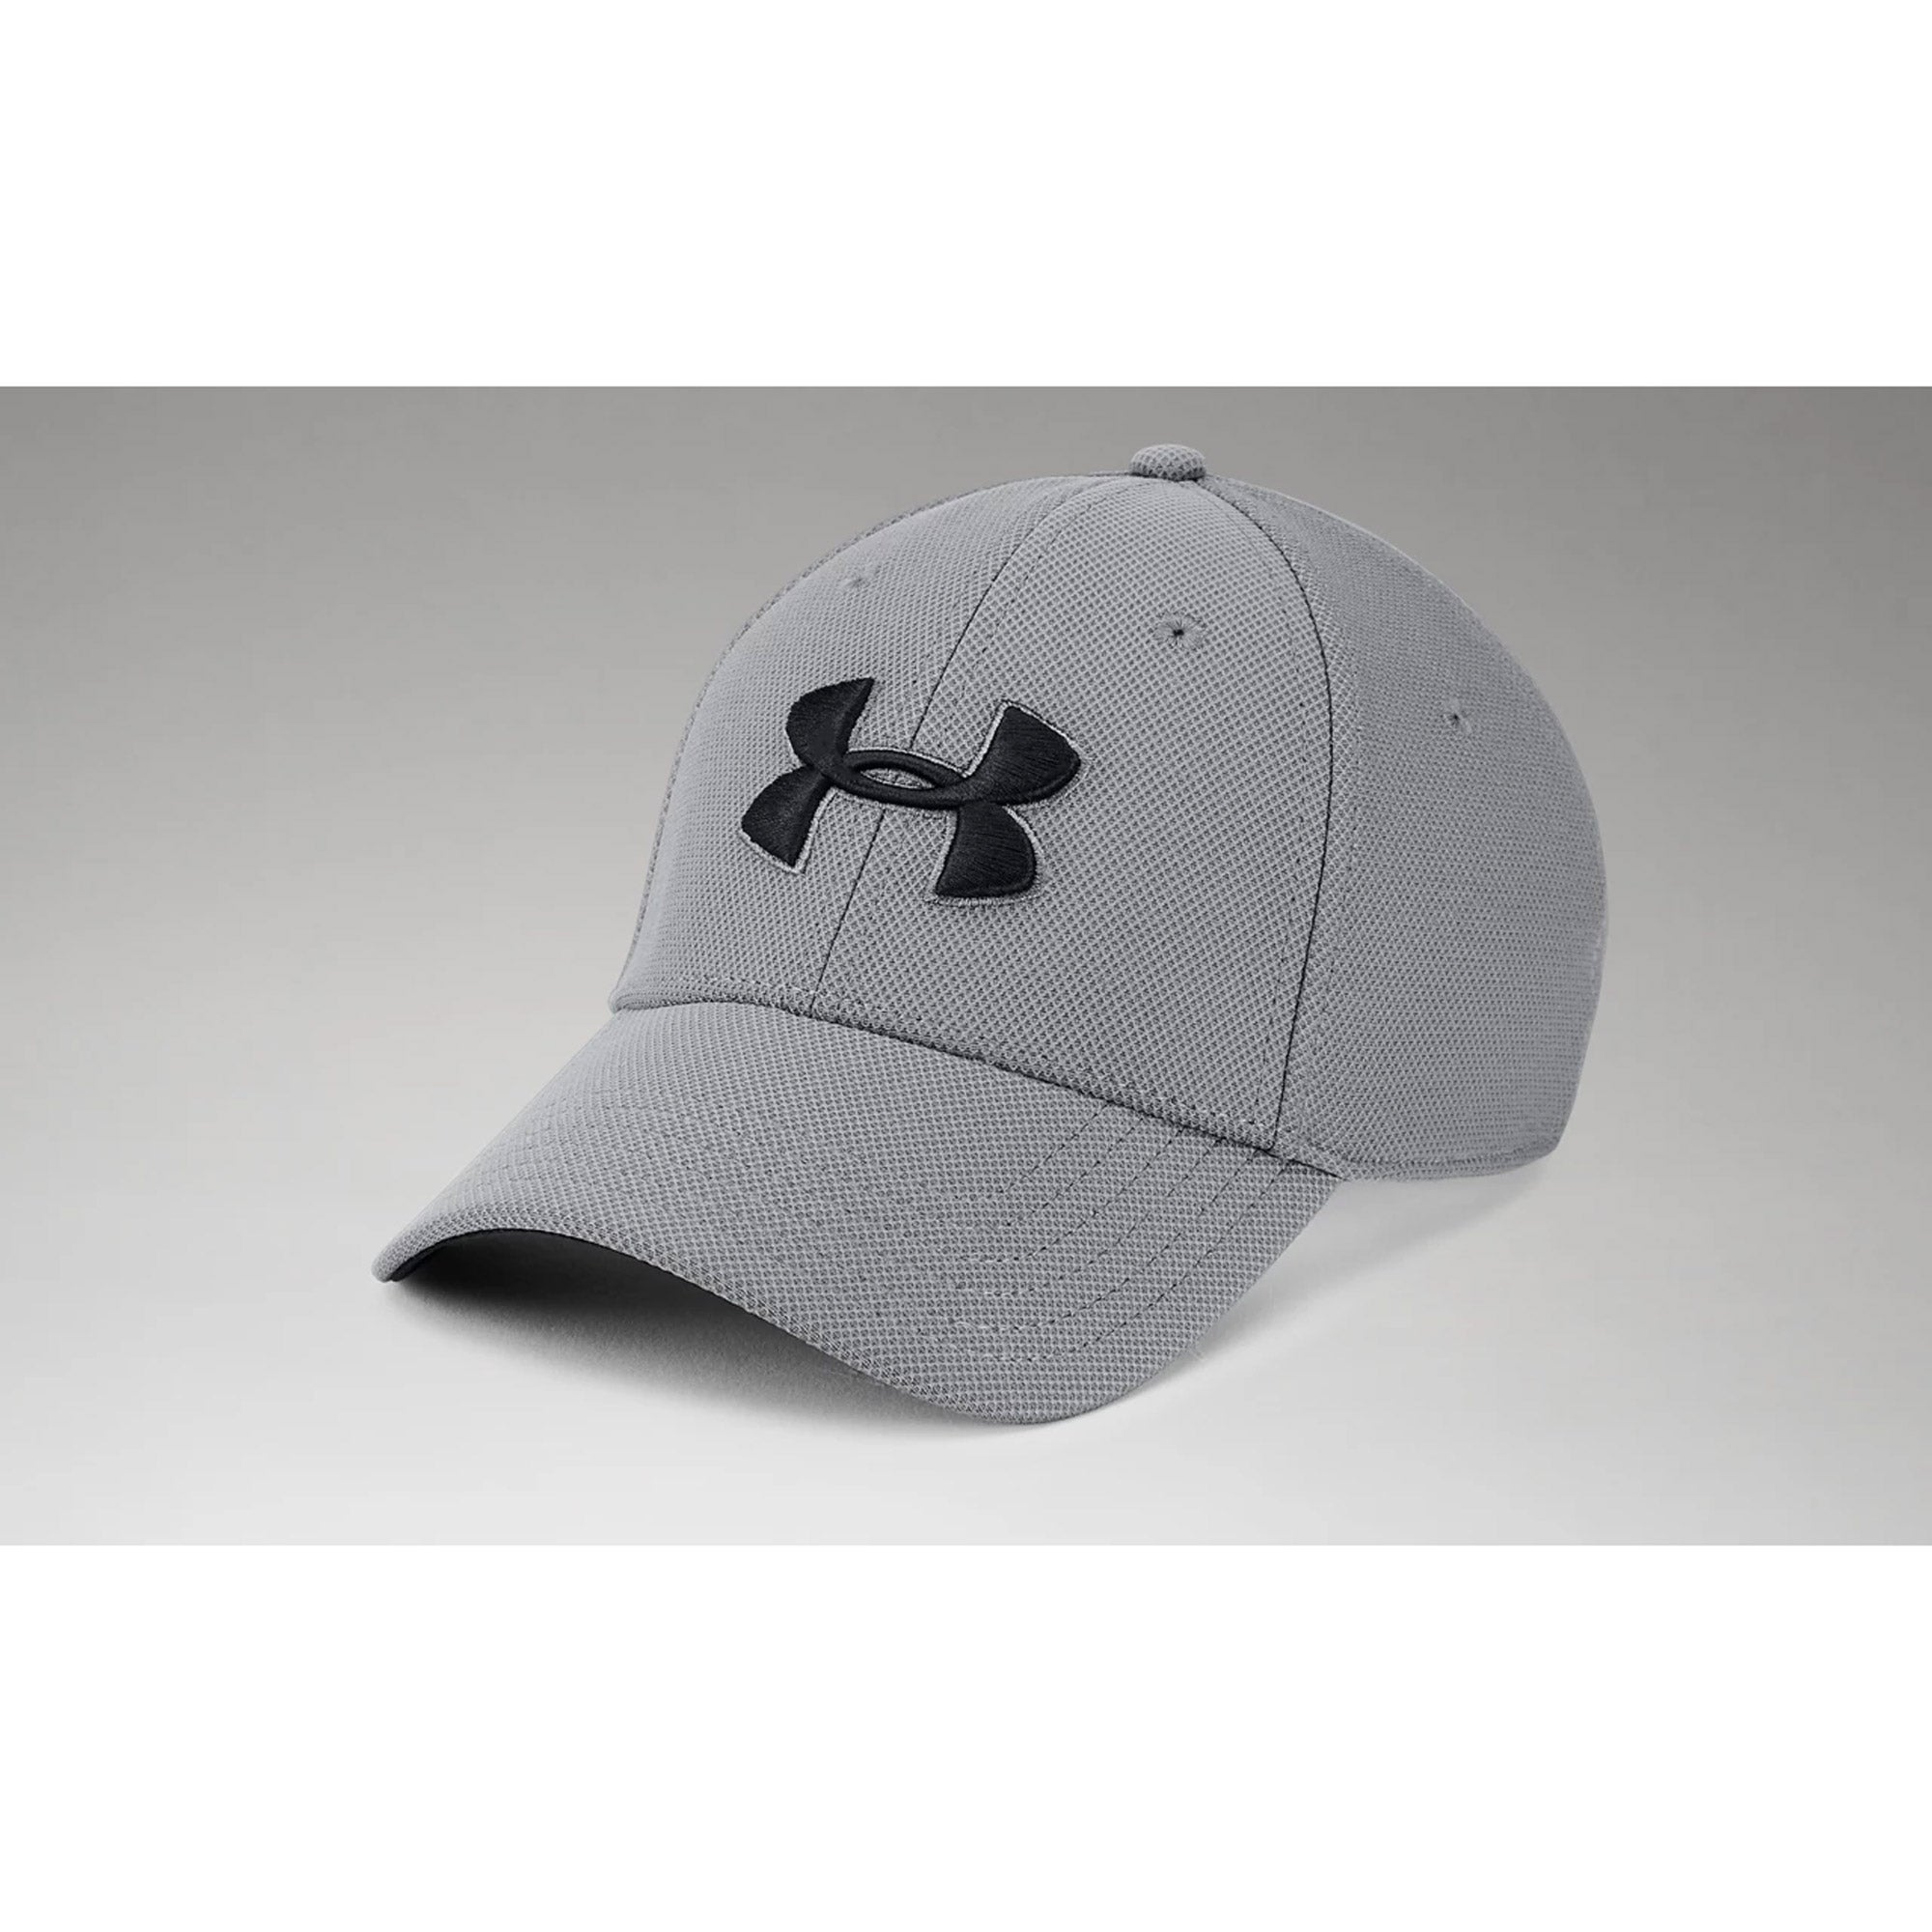 Grey Under Armour Hat Hotsell